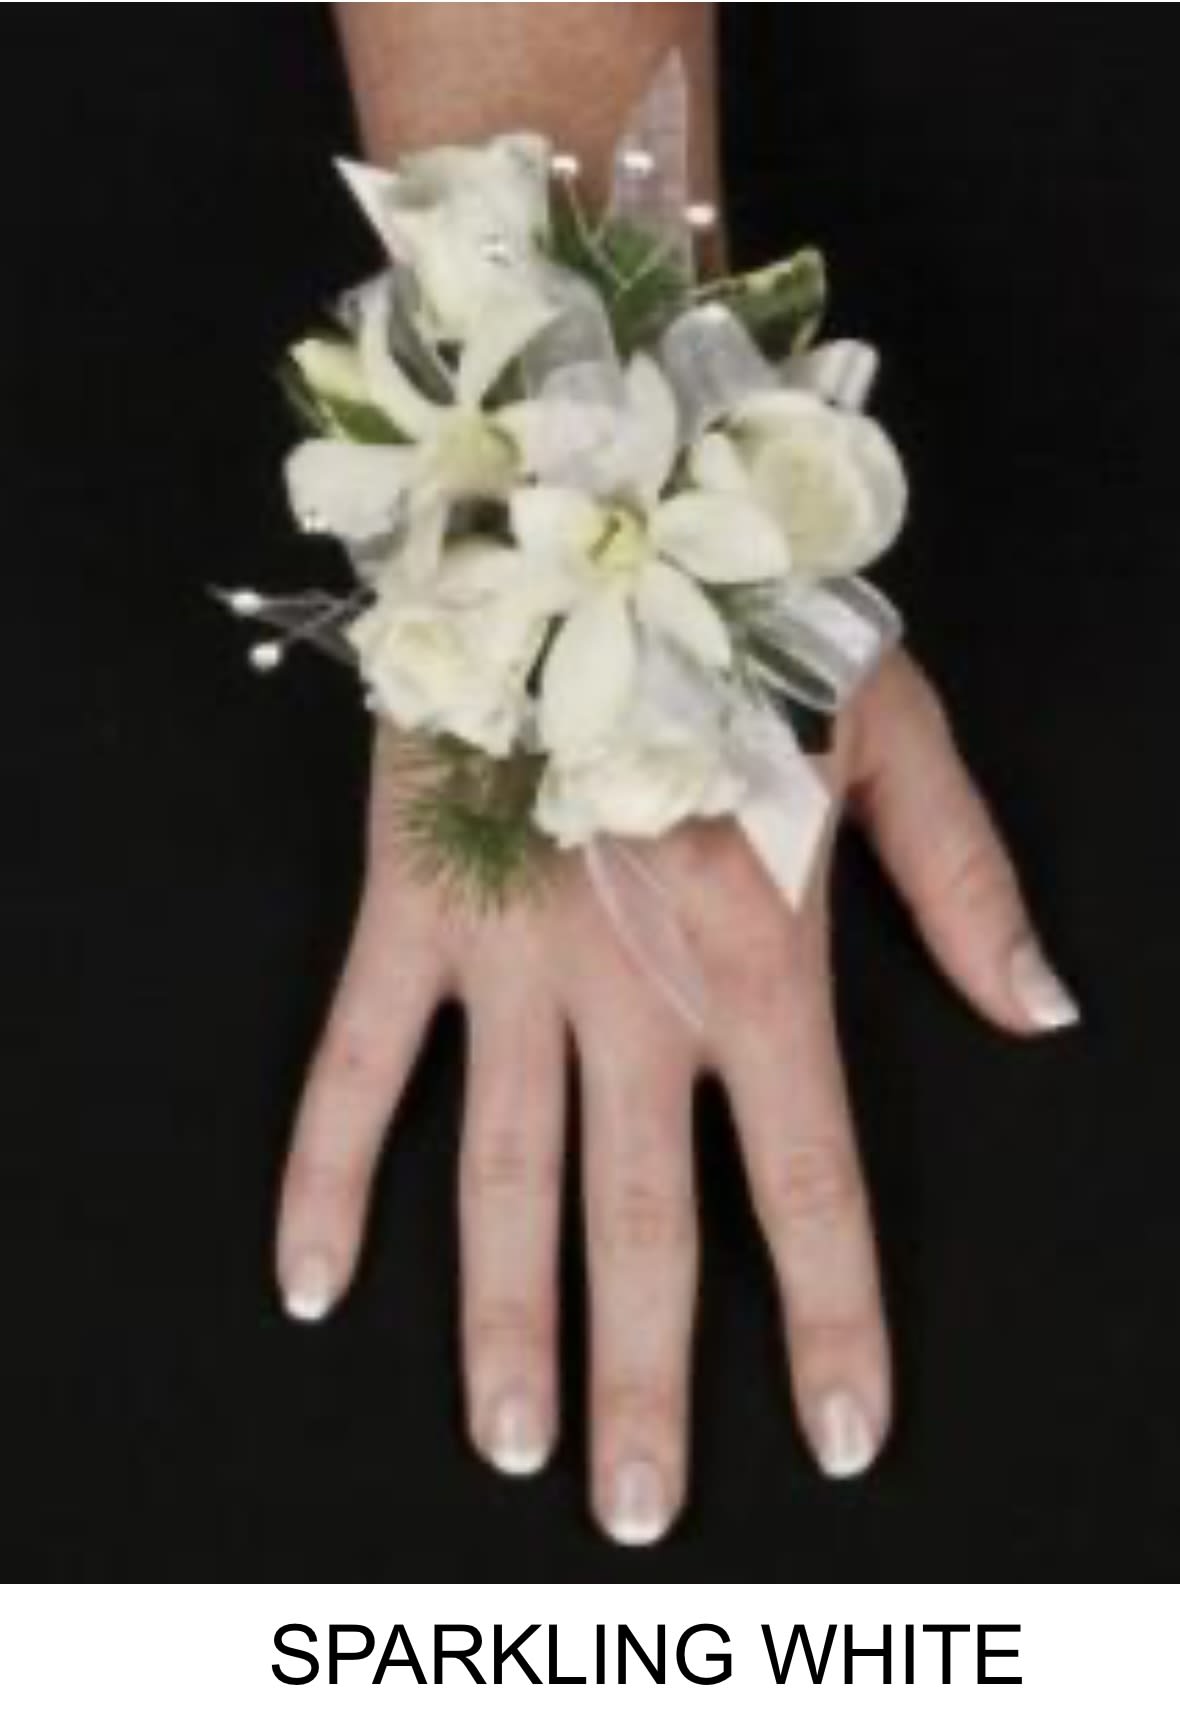 Sparking white corsage - White orchids and roses wristlet corsage with all the bling bling you want